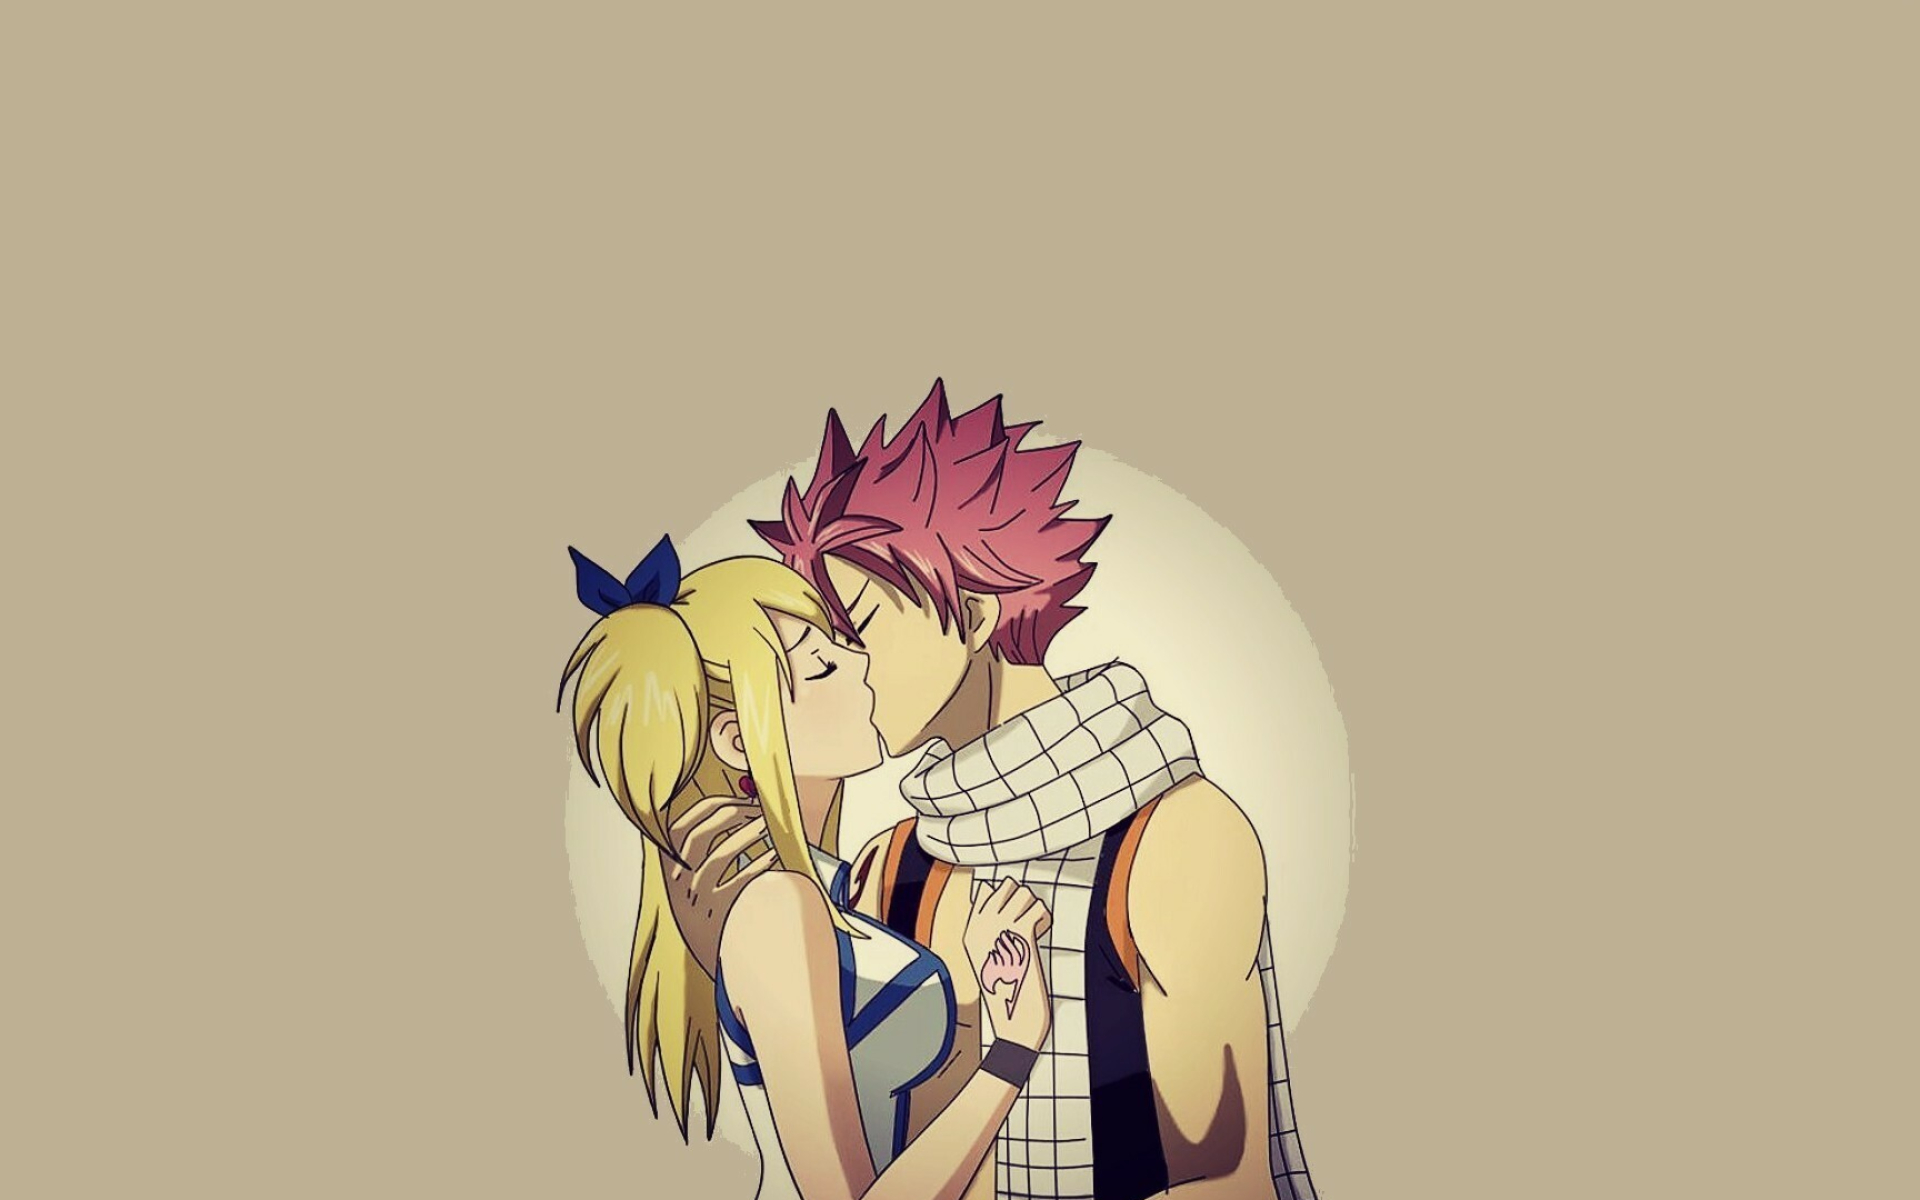 Fairy Tail: Lucy and Natsu, Won Animax Asia's "Anime of the Year" award in 2010. 1920x1200 HD Background.